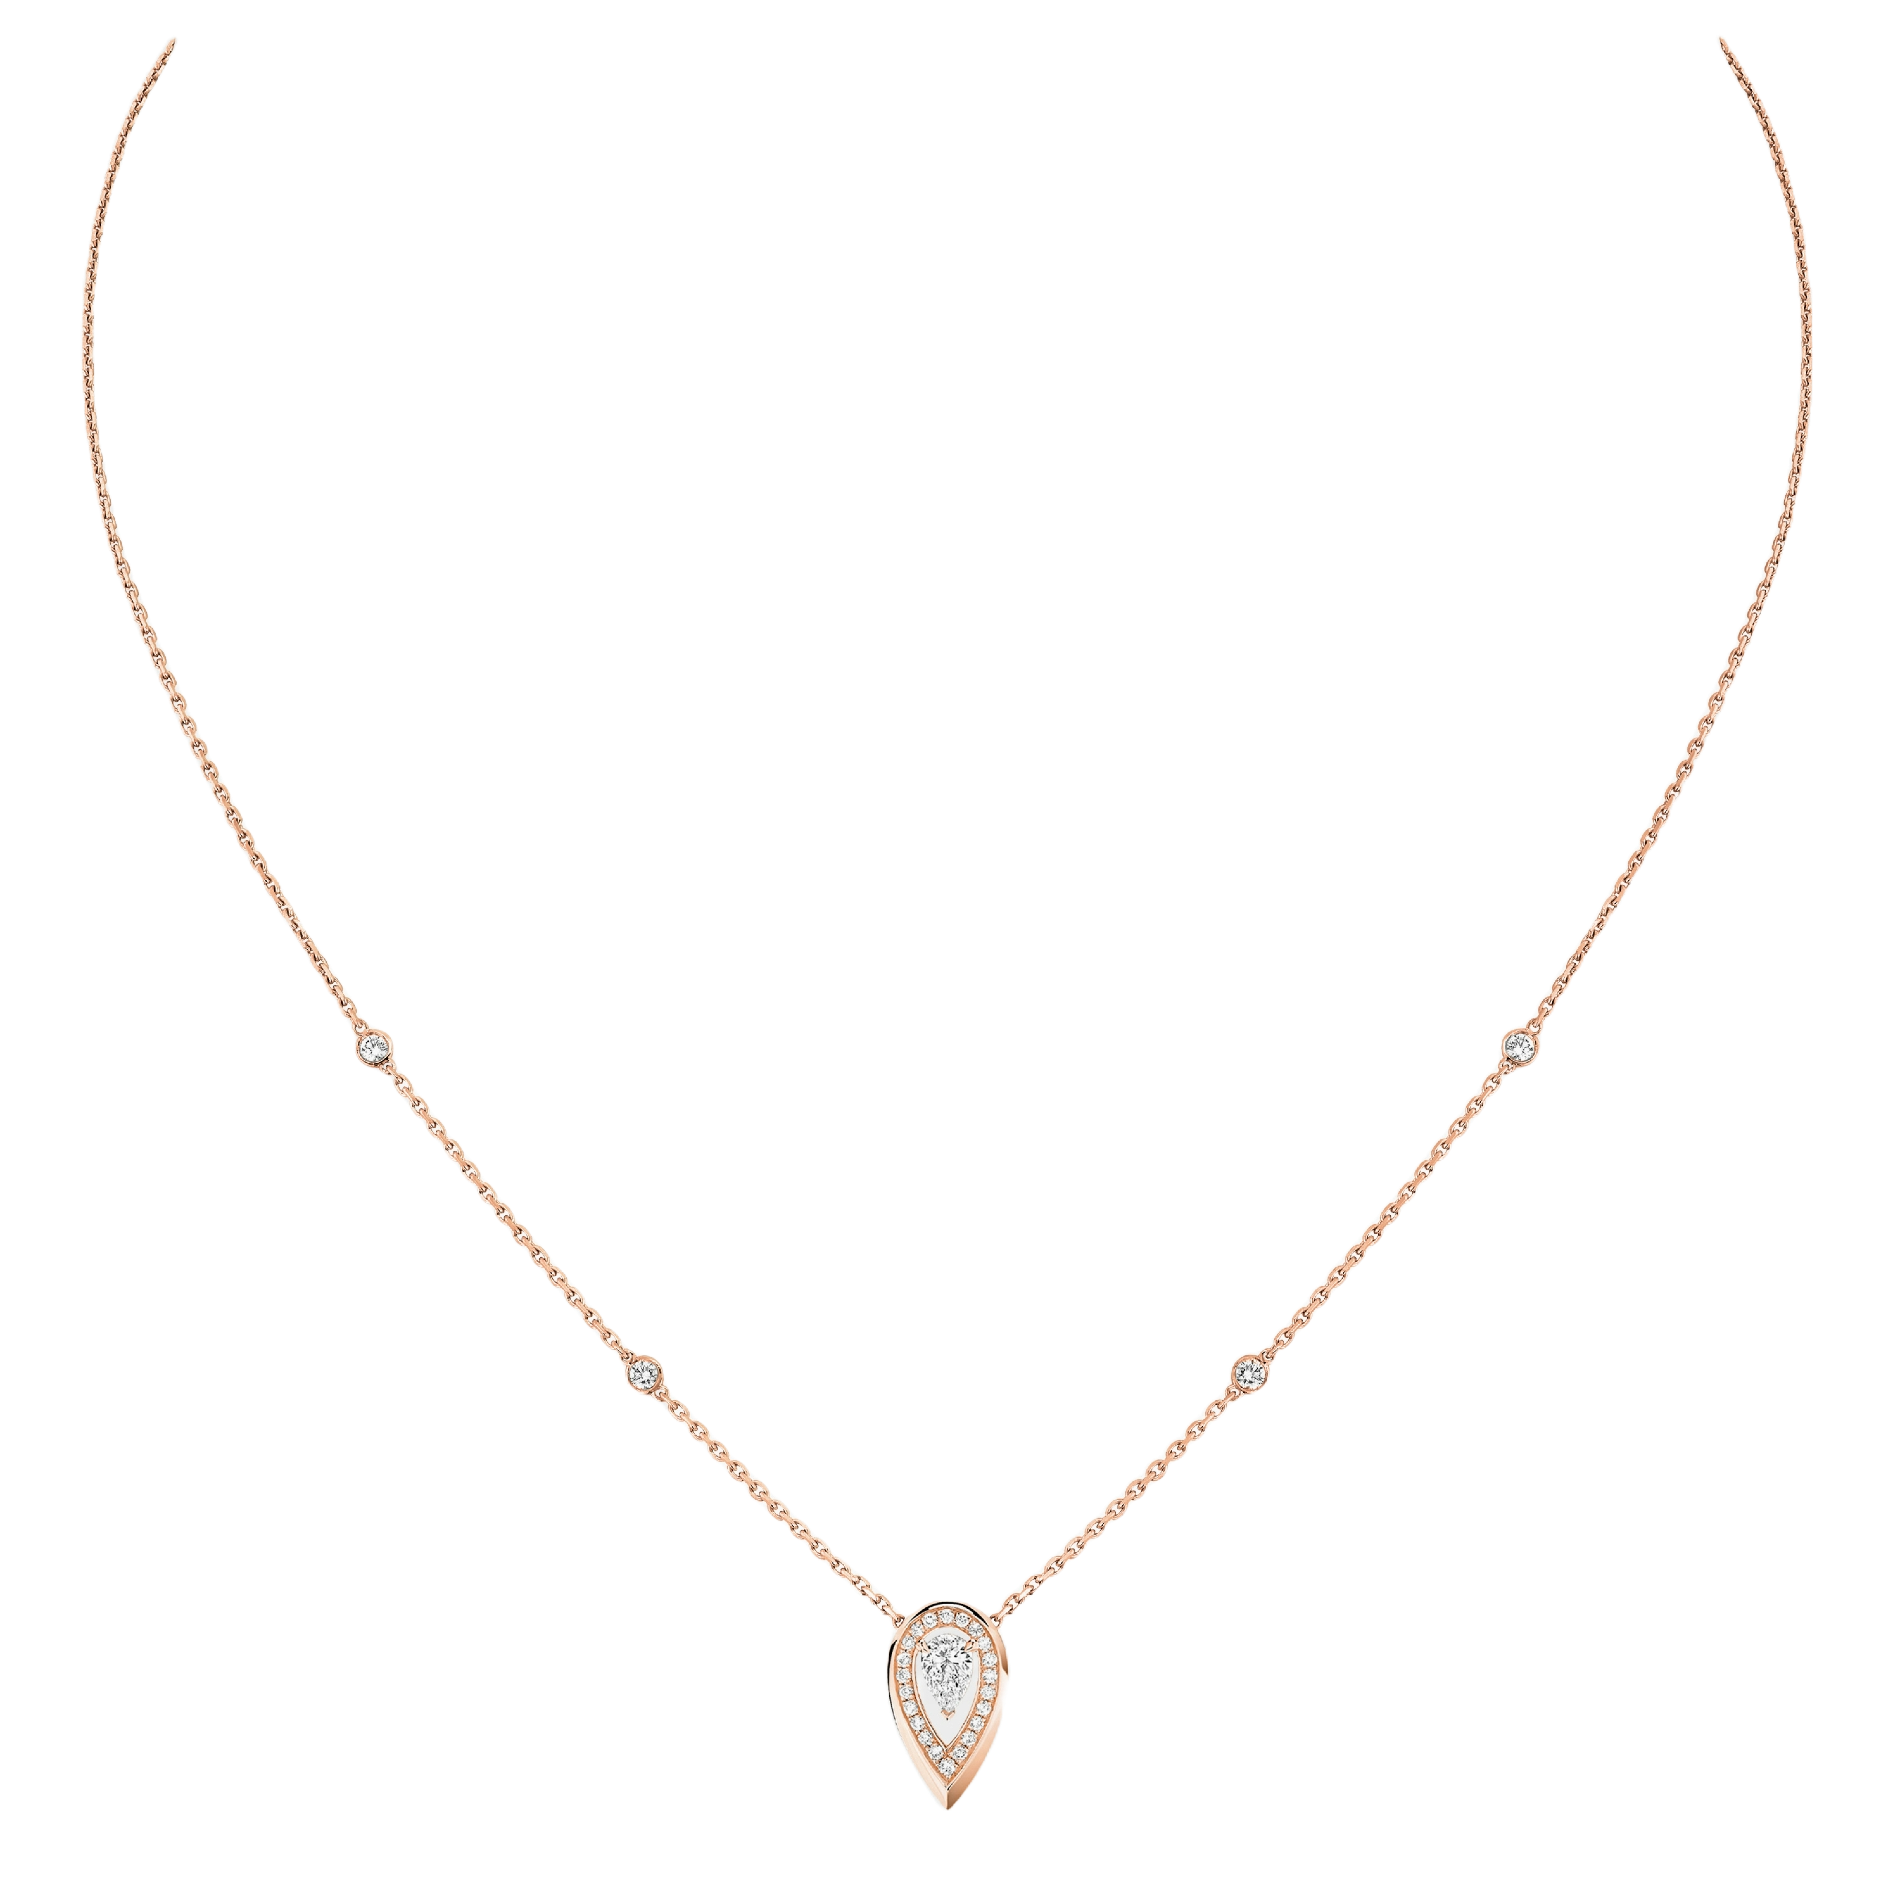 Collier femme or rose diamant fiery 0,10ct